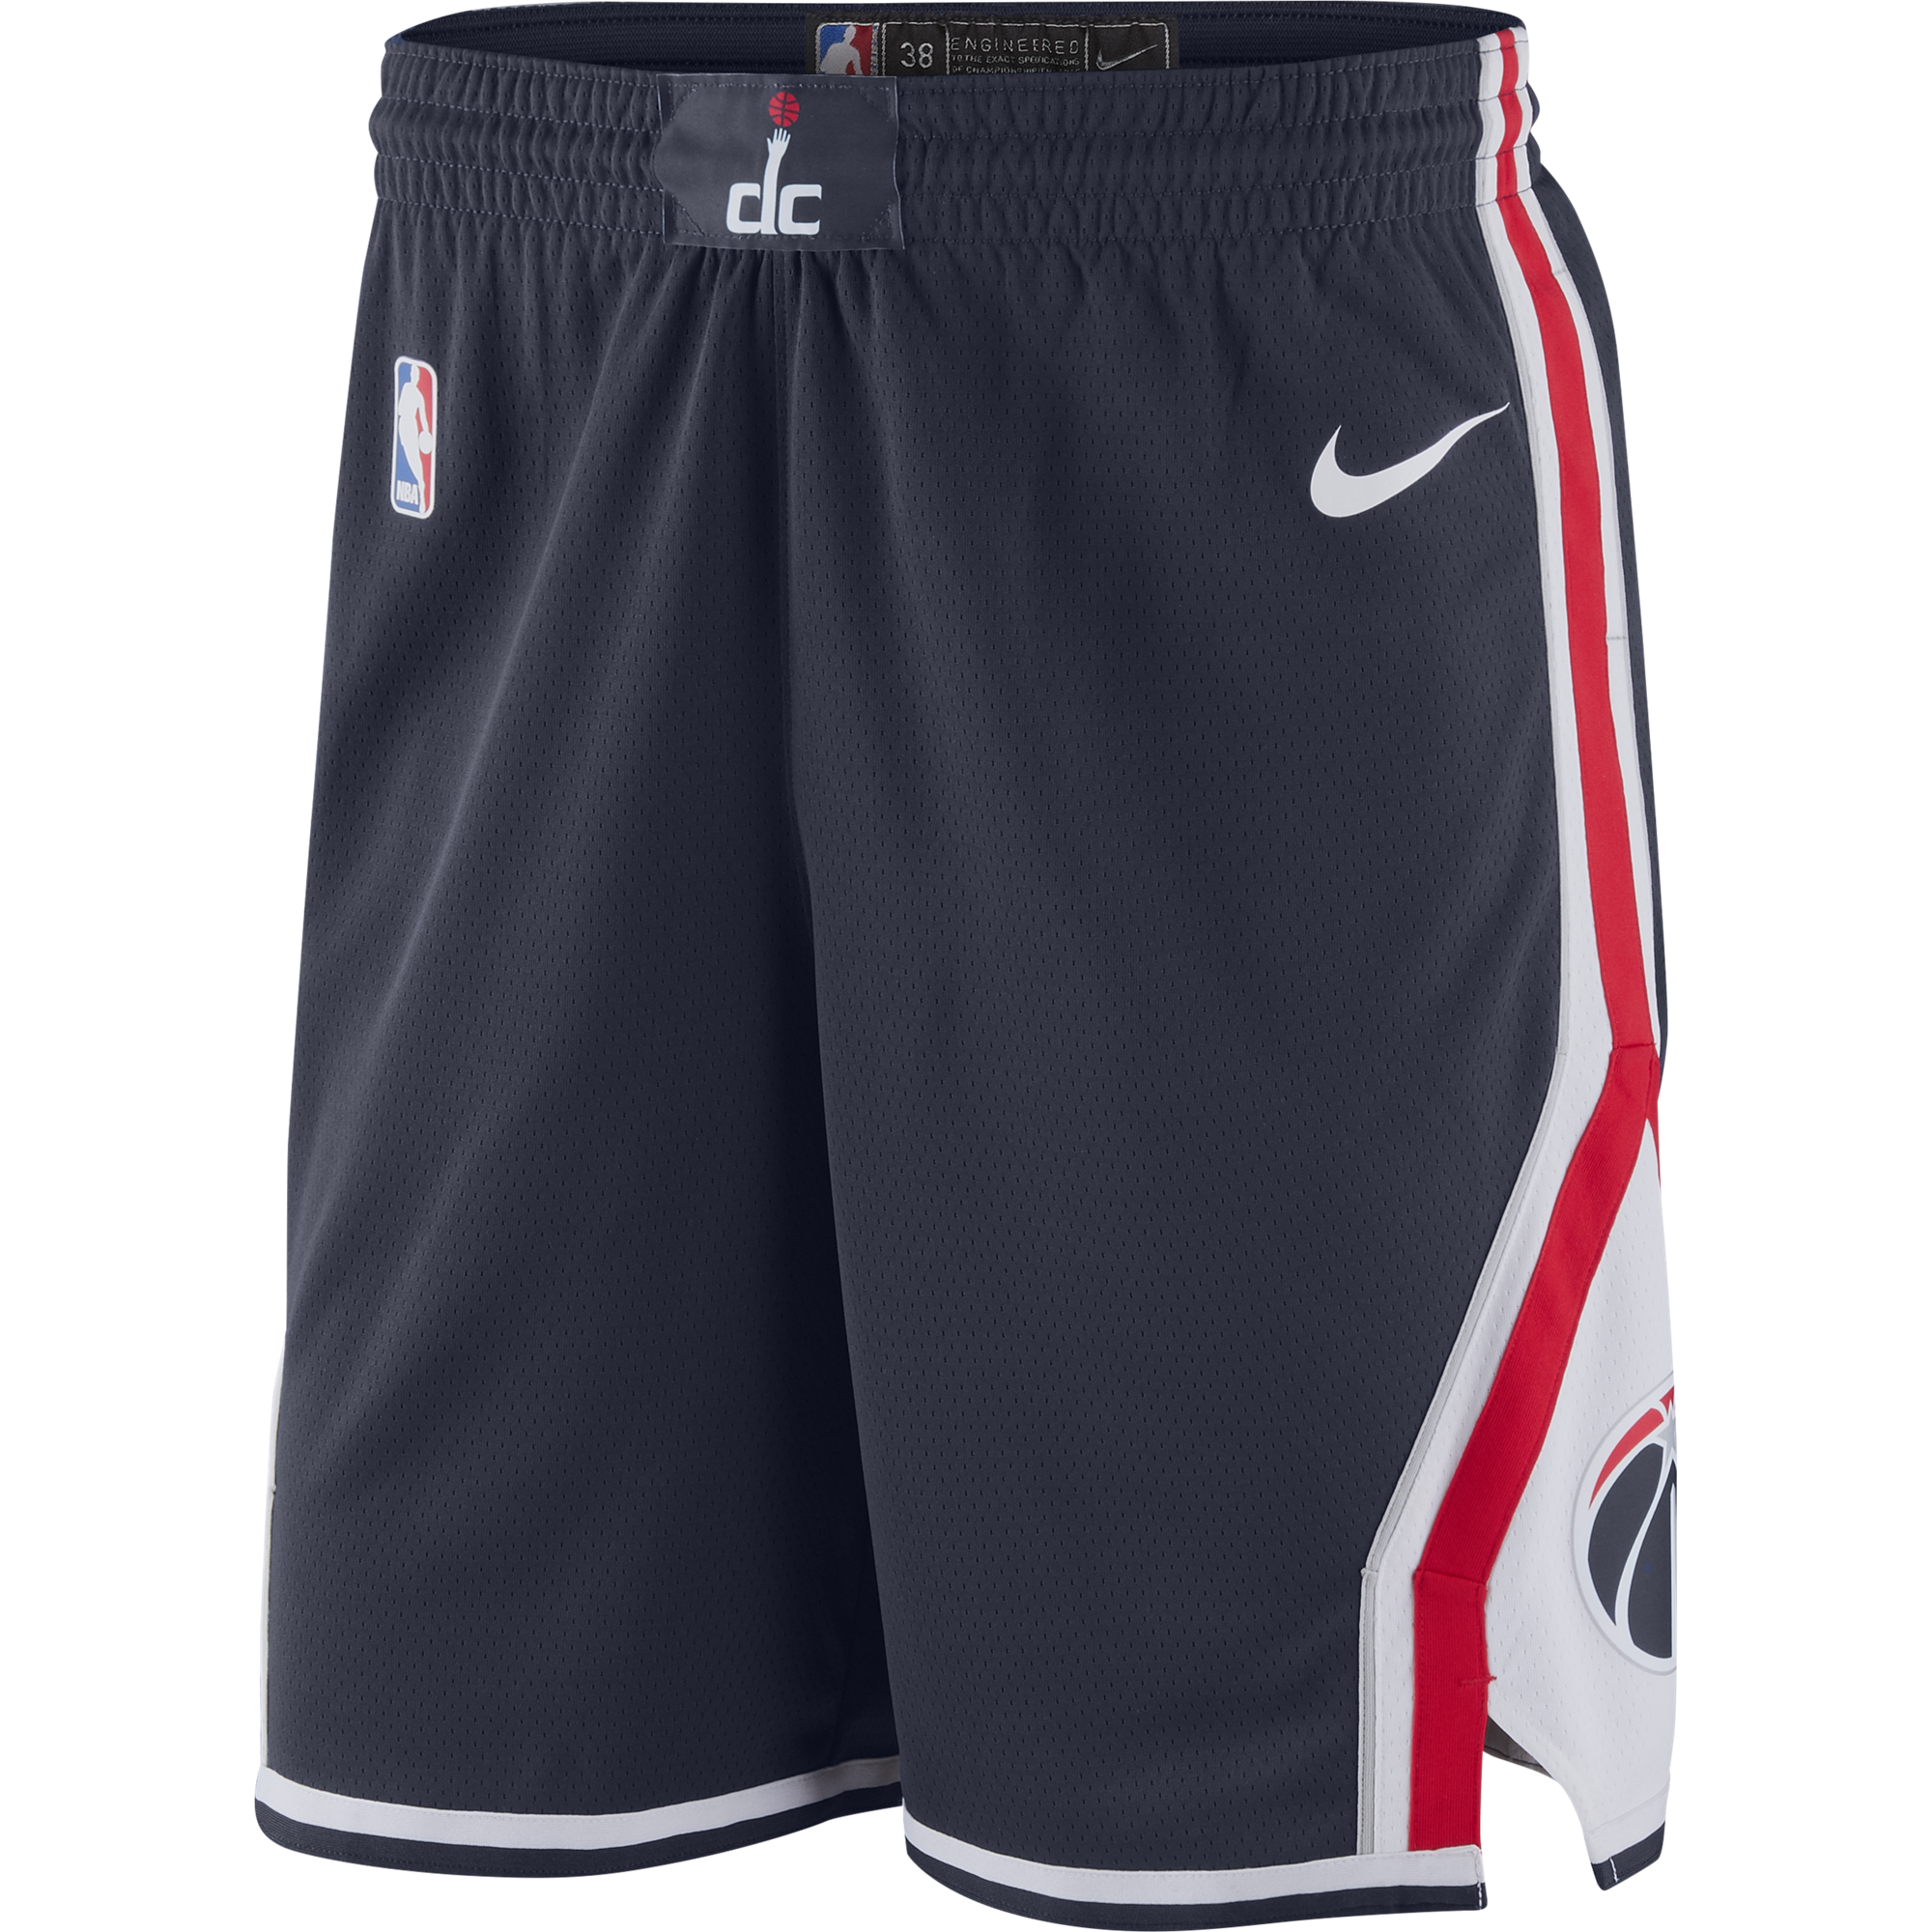 NBA Uniform Tracker™ on X: City Edition shorts for the Wizards, Clippers  and Pacers. Don't know the source so tag if you do.   / X